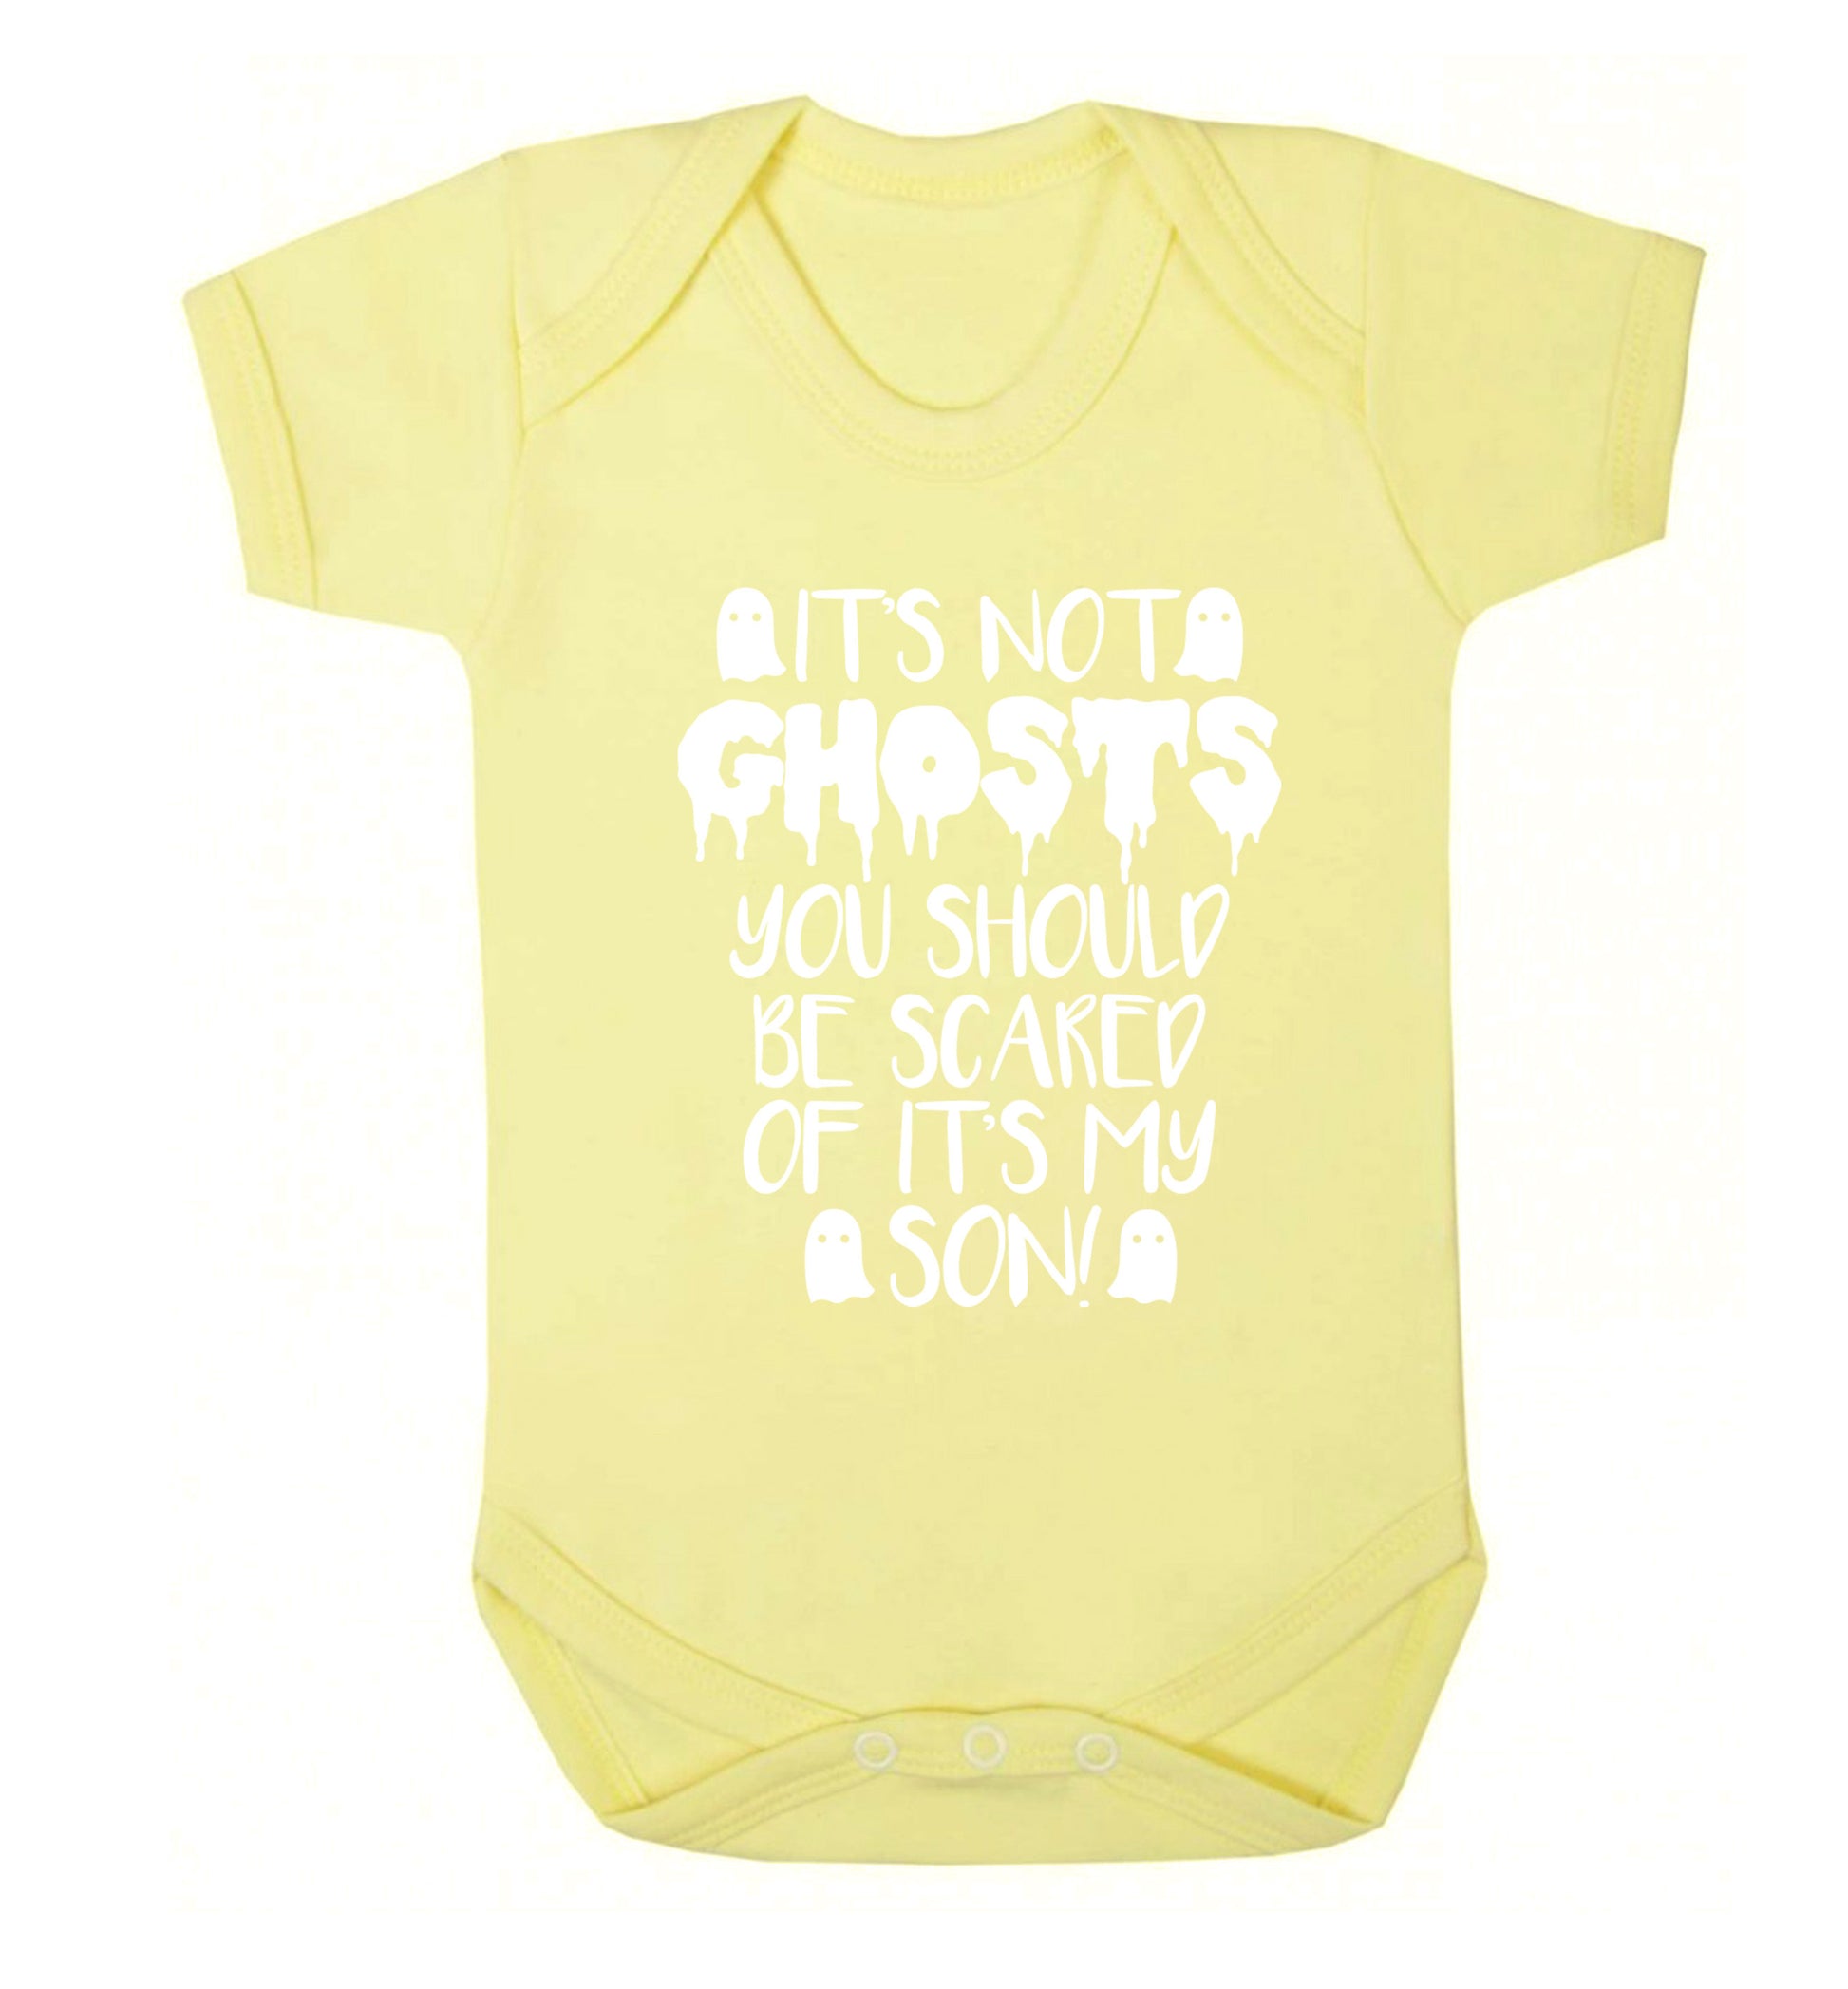 It's not ghosts you should be scared of it's my son! Baby Vest pale yellow 18-24 months